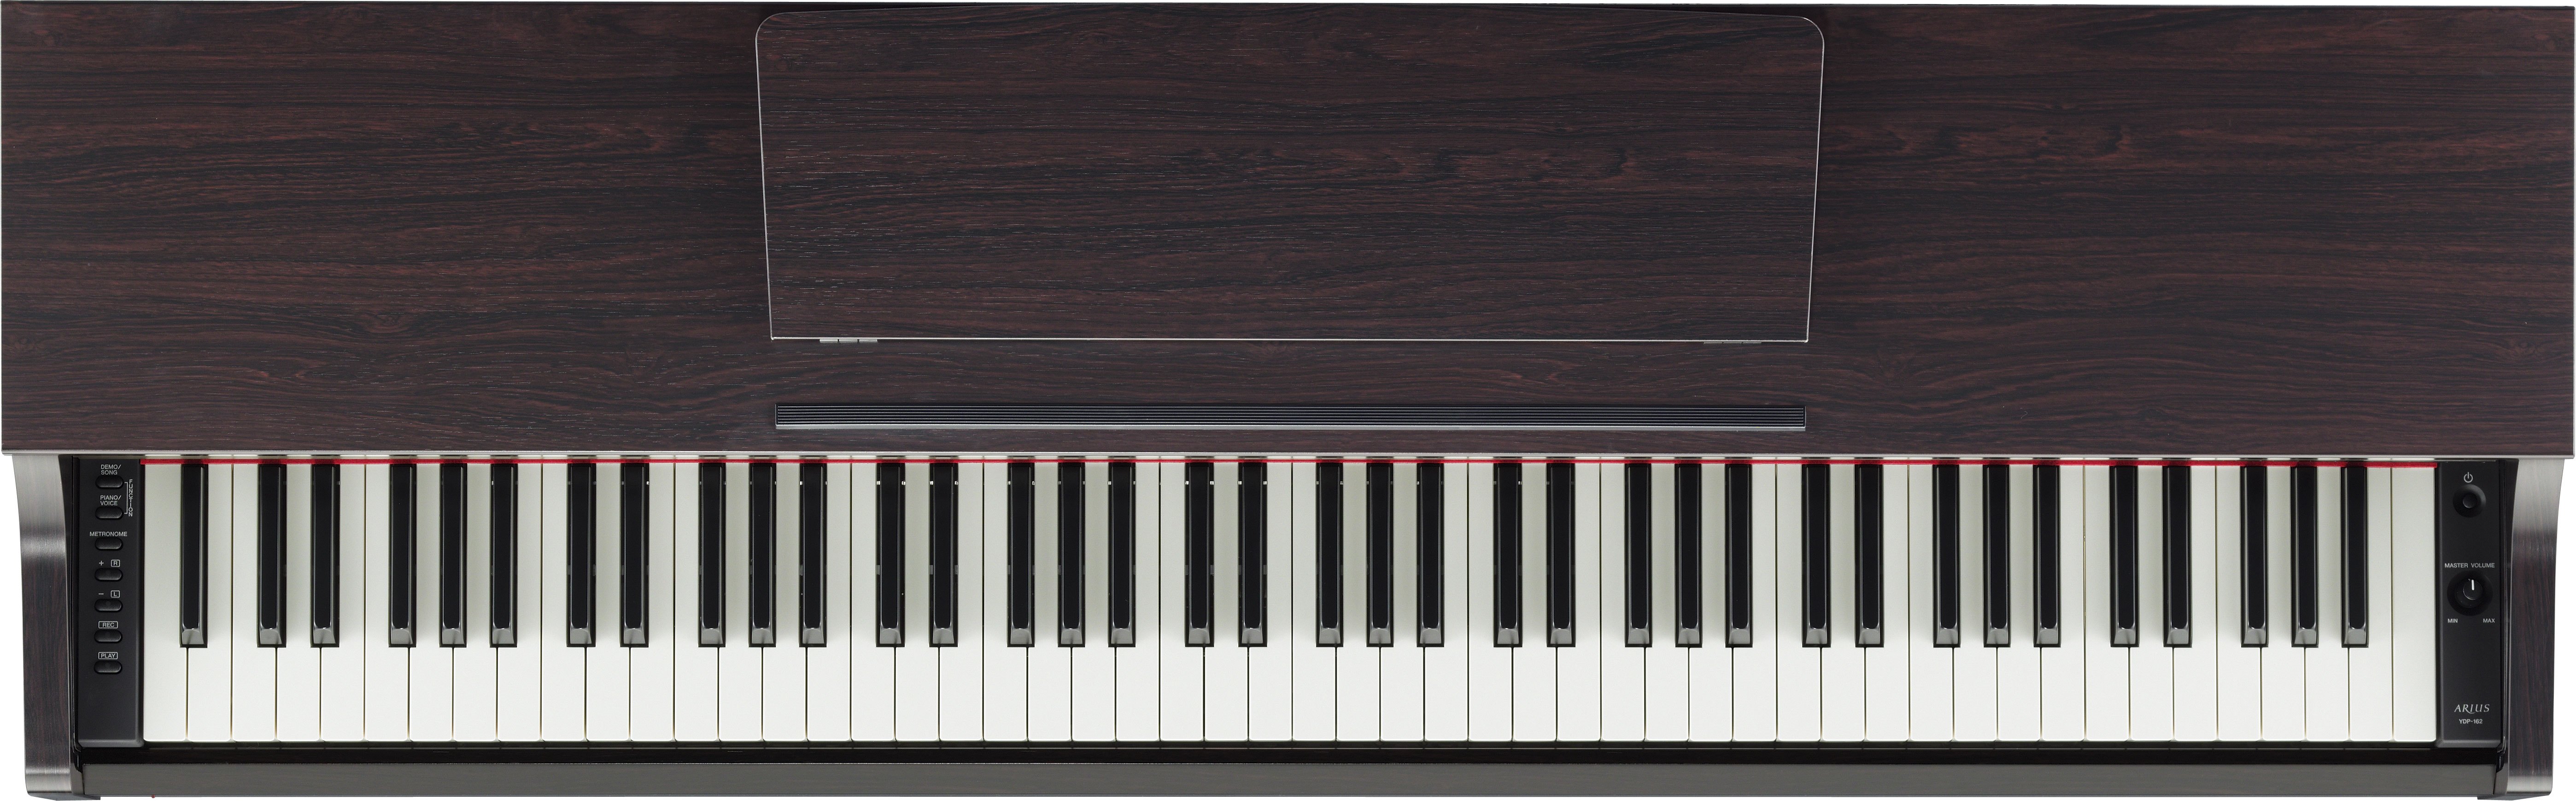 YDP-162 - Specs - ARIUS - Pianos - Musical Instruments - Products 